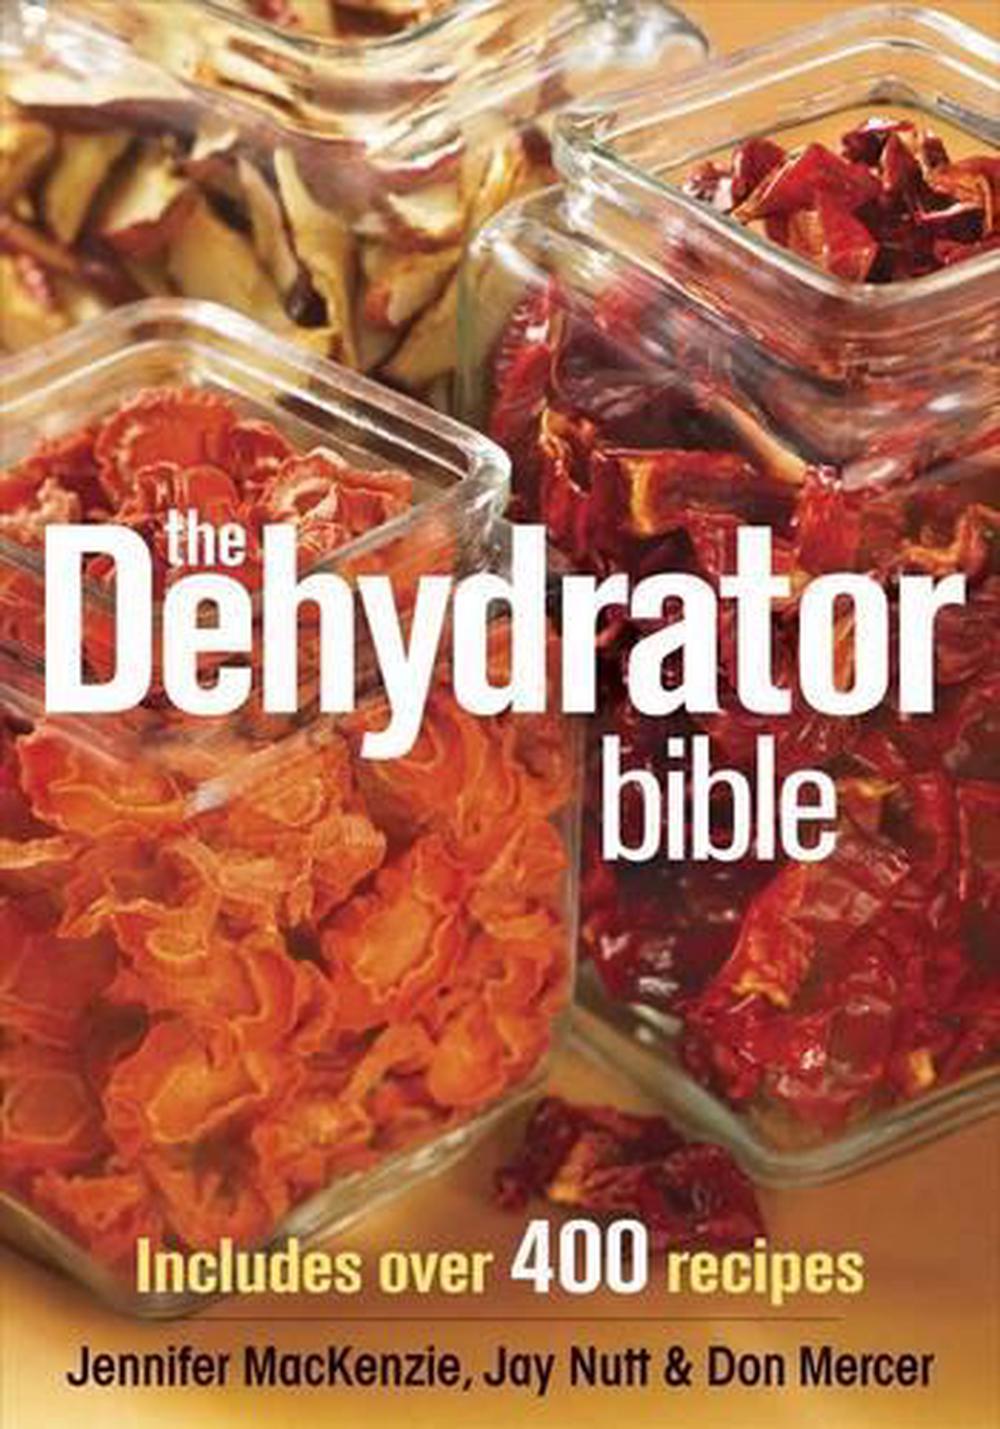 The Dehydrator Bible Includes Over 400 Recipes by Jennifer MacKenzie